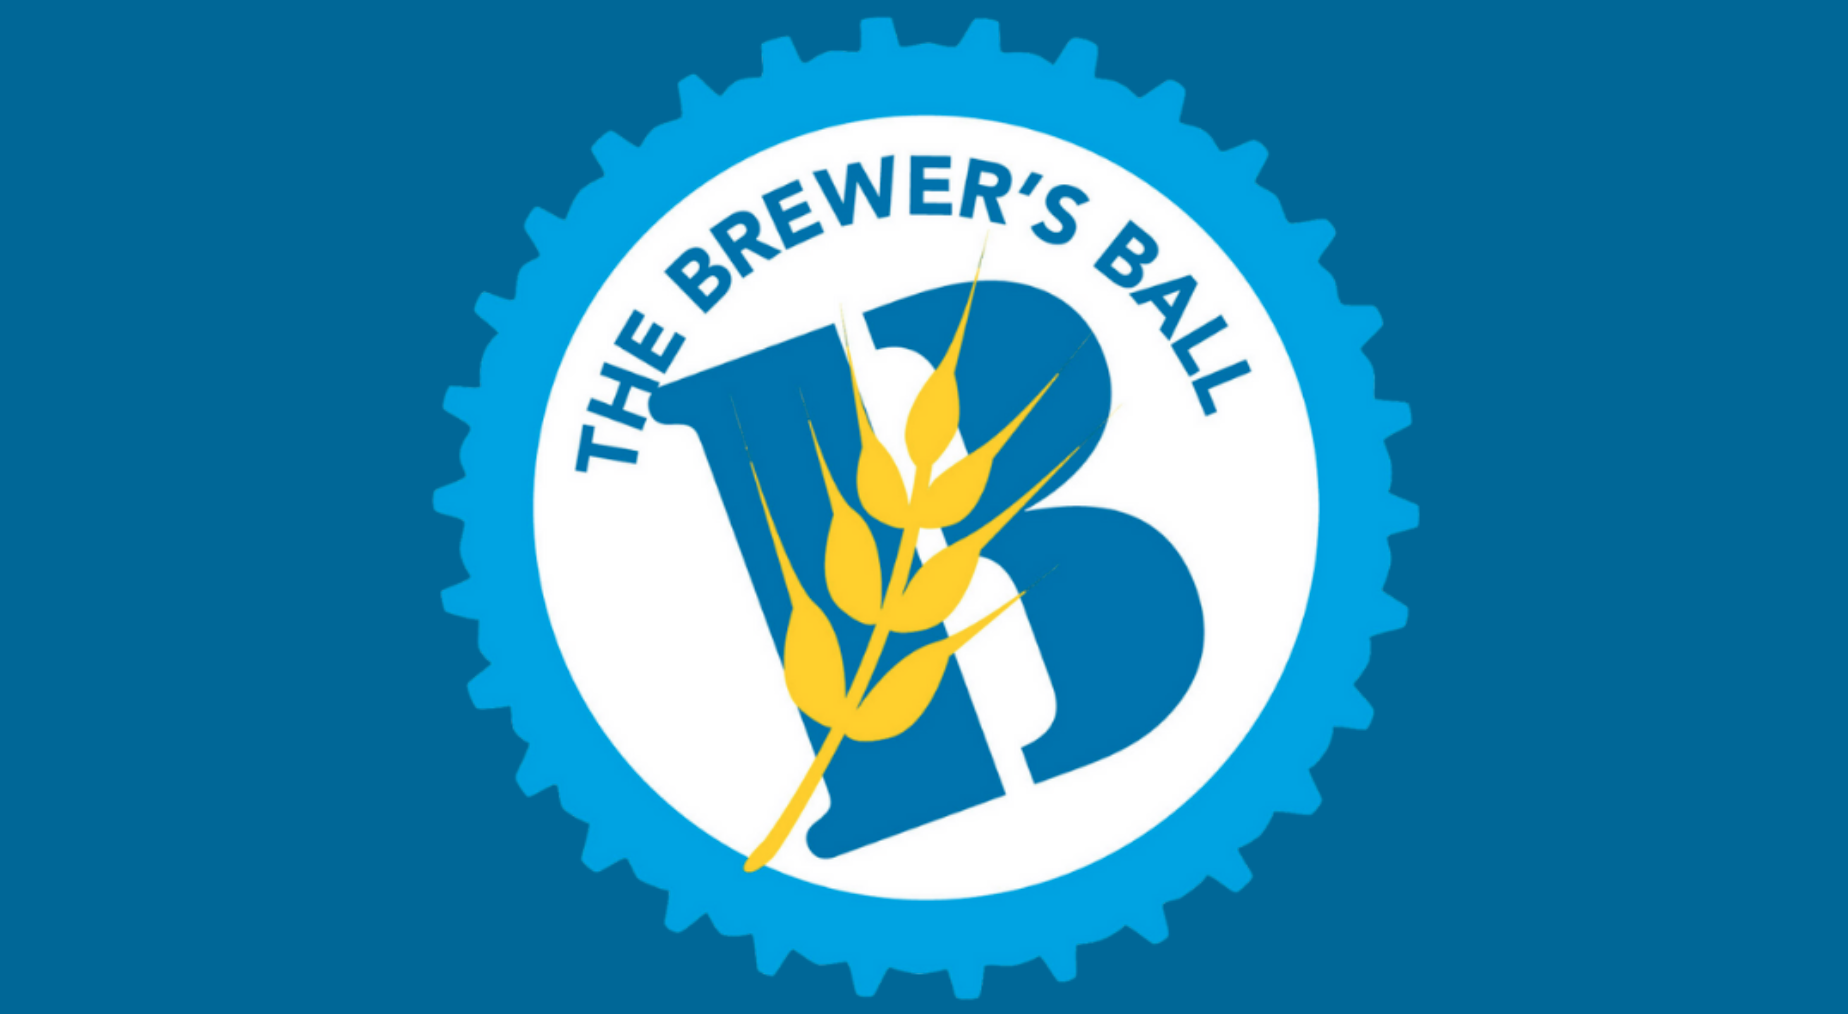 Brewer’s Ball is Back